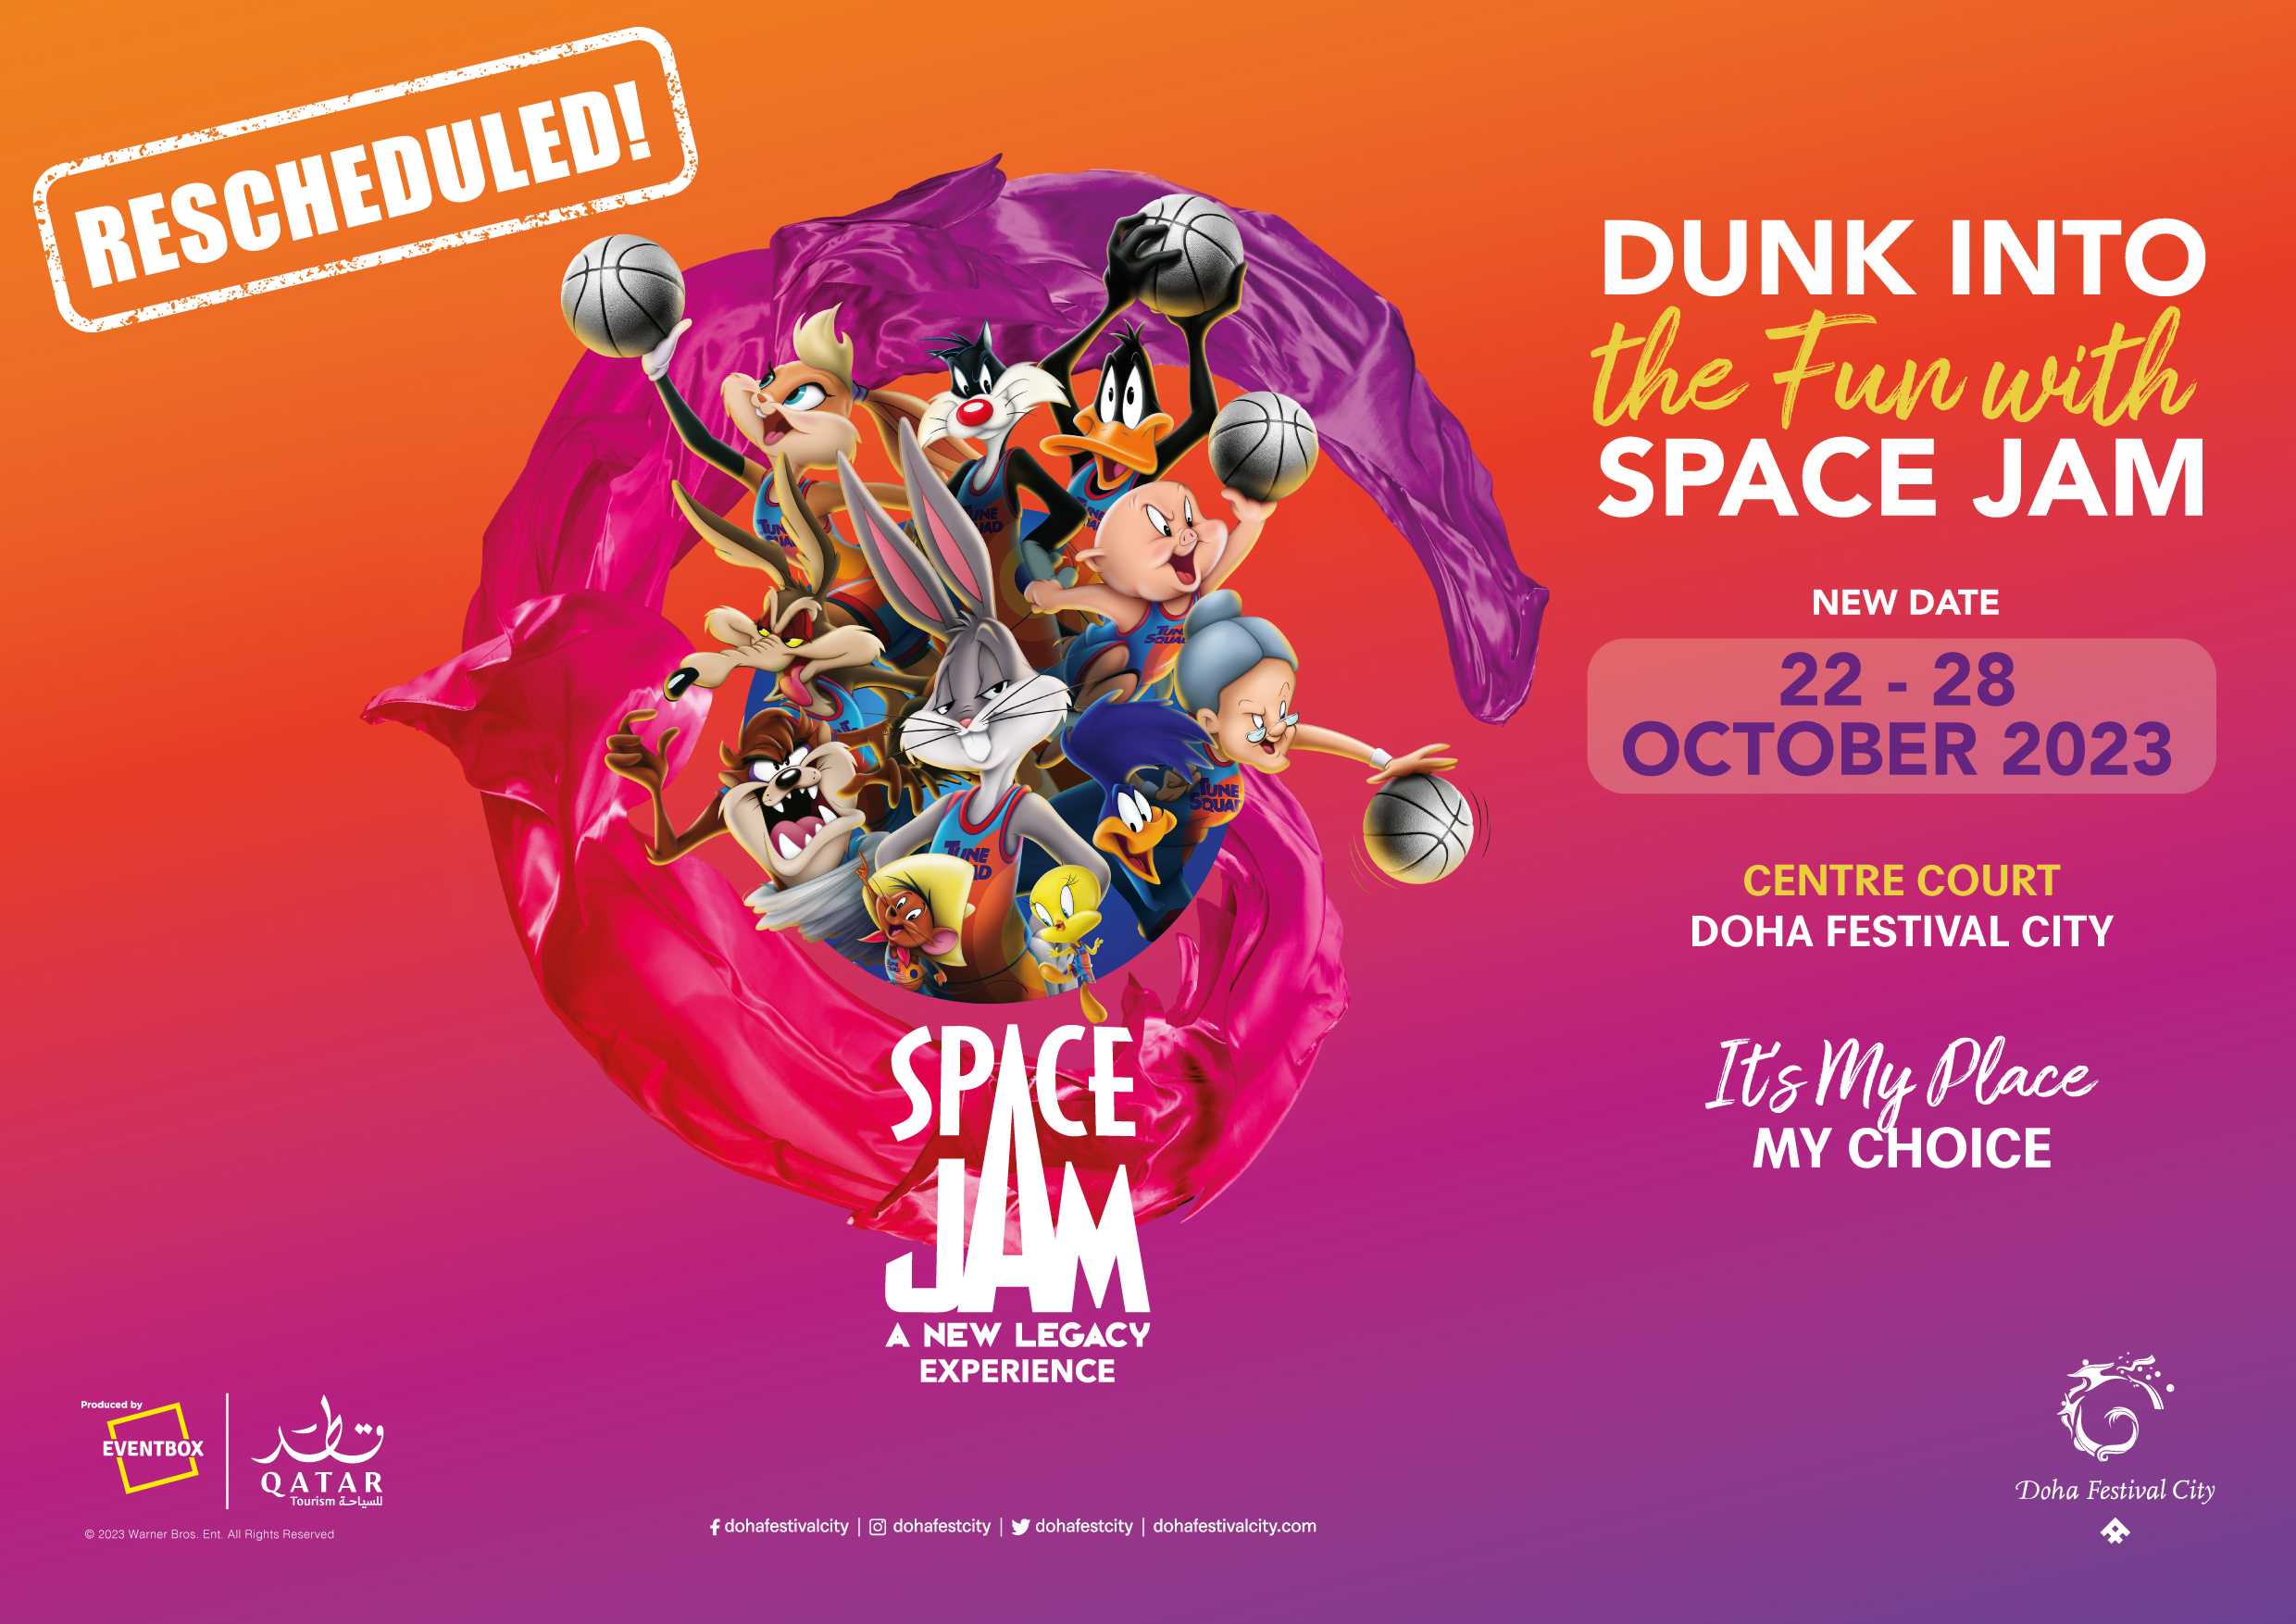 "Space Jam: A New Legacy" Experience at Doha Festival City to Open 22nd October